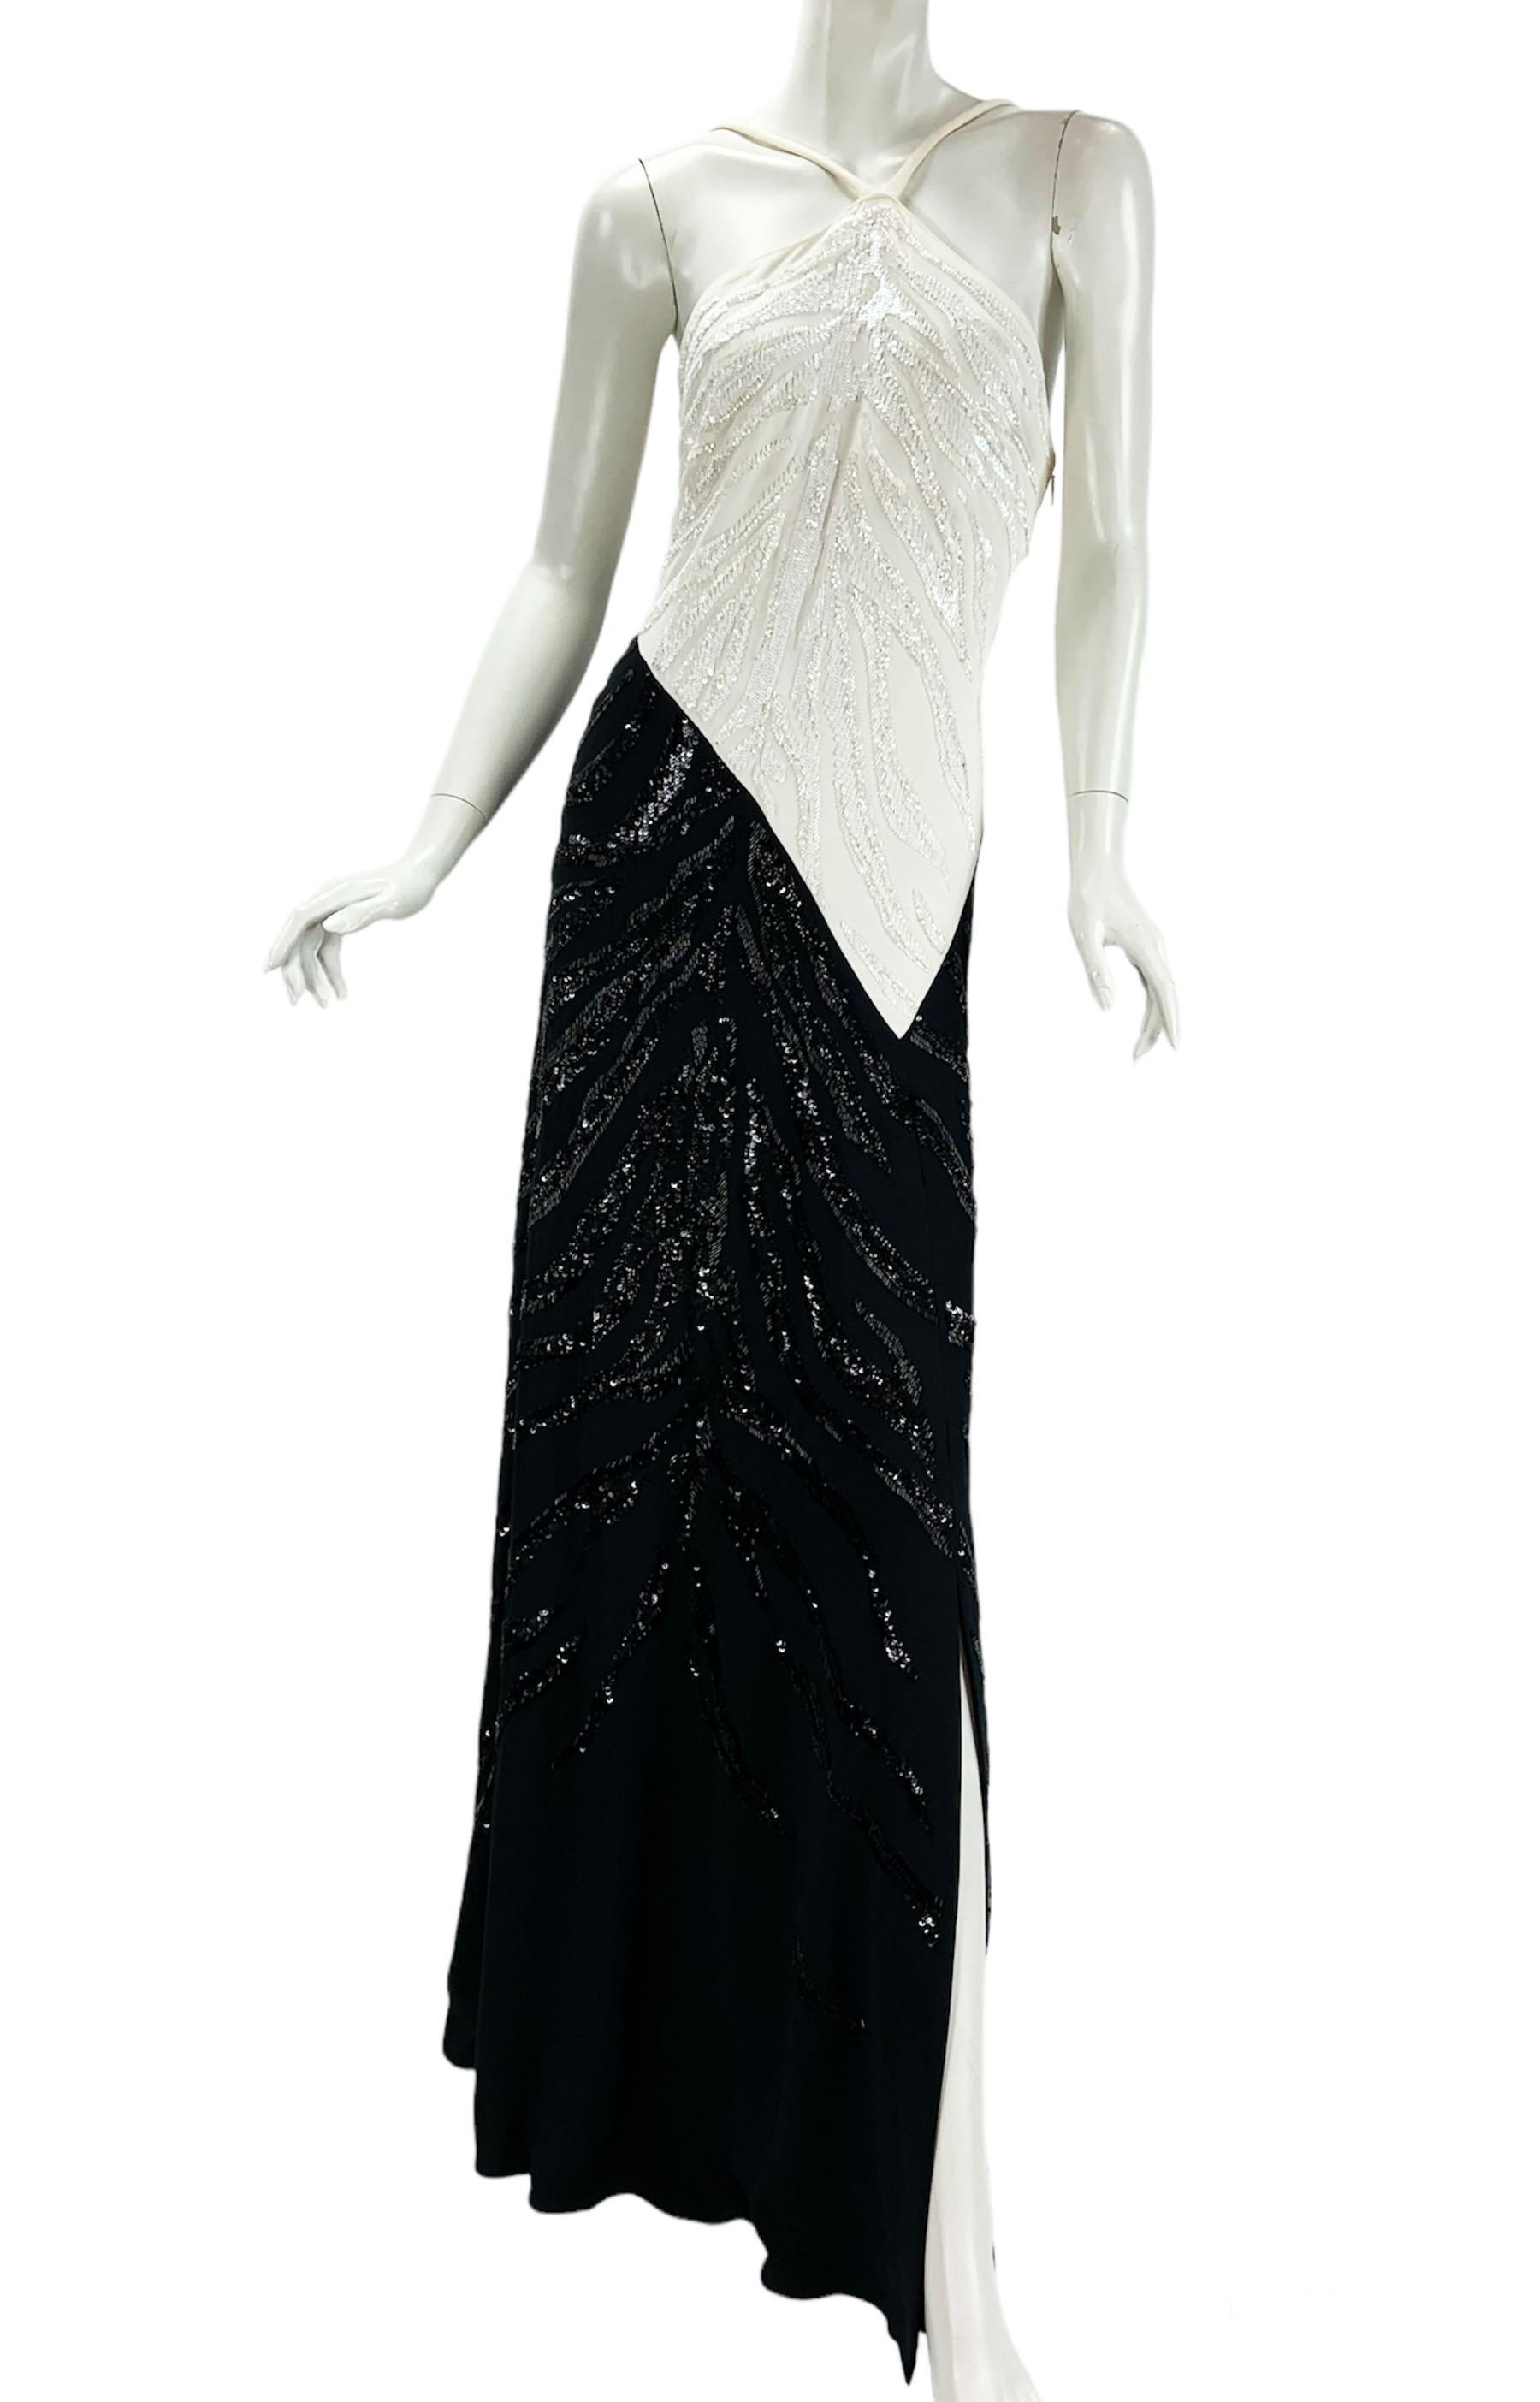 New Roberto Cavalli Fully Embellished Dress Gown
Italian size 44 ( US 8/10 ) - please check measurements.
Classic combination of white and black, fully embellished with beads and sequins, side slit, fully lined in silk, fabric stretchy.
95% Viscose,